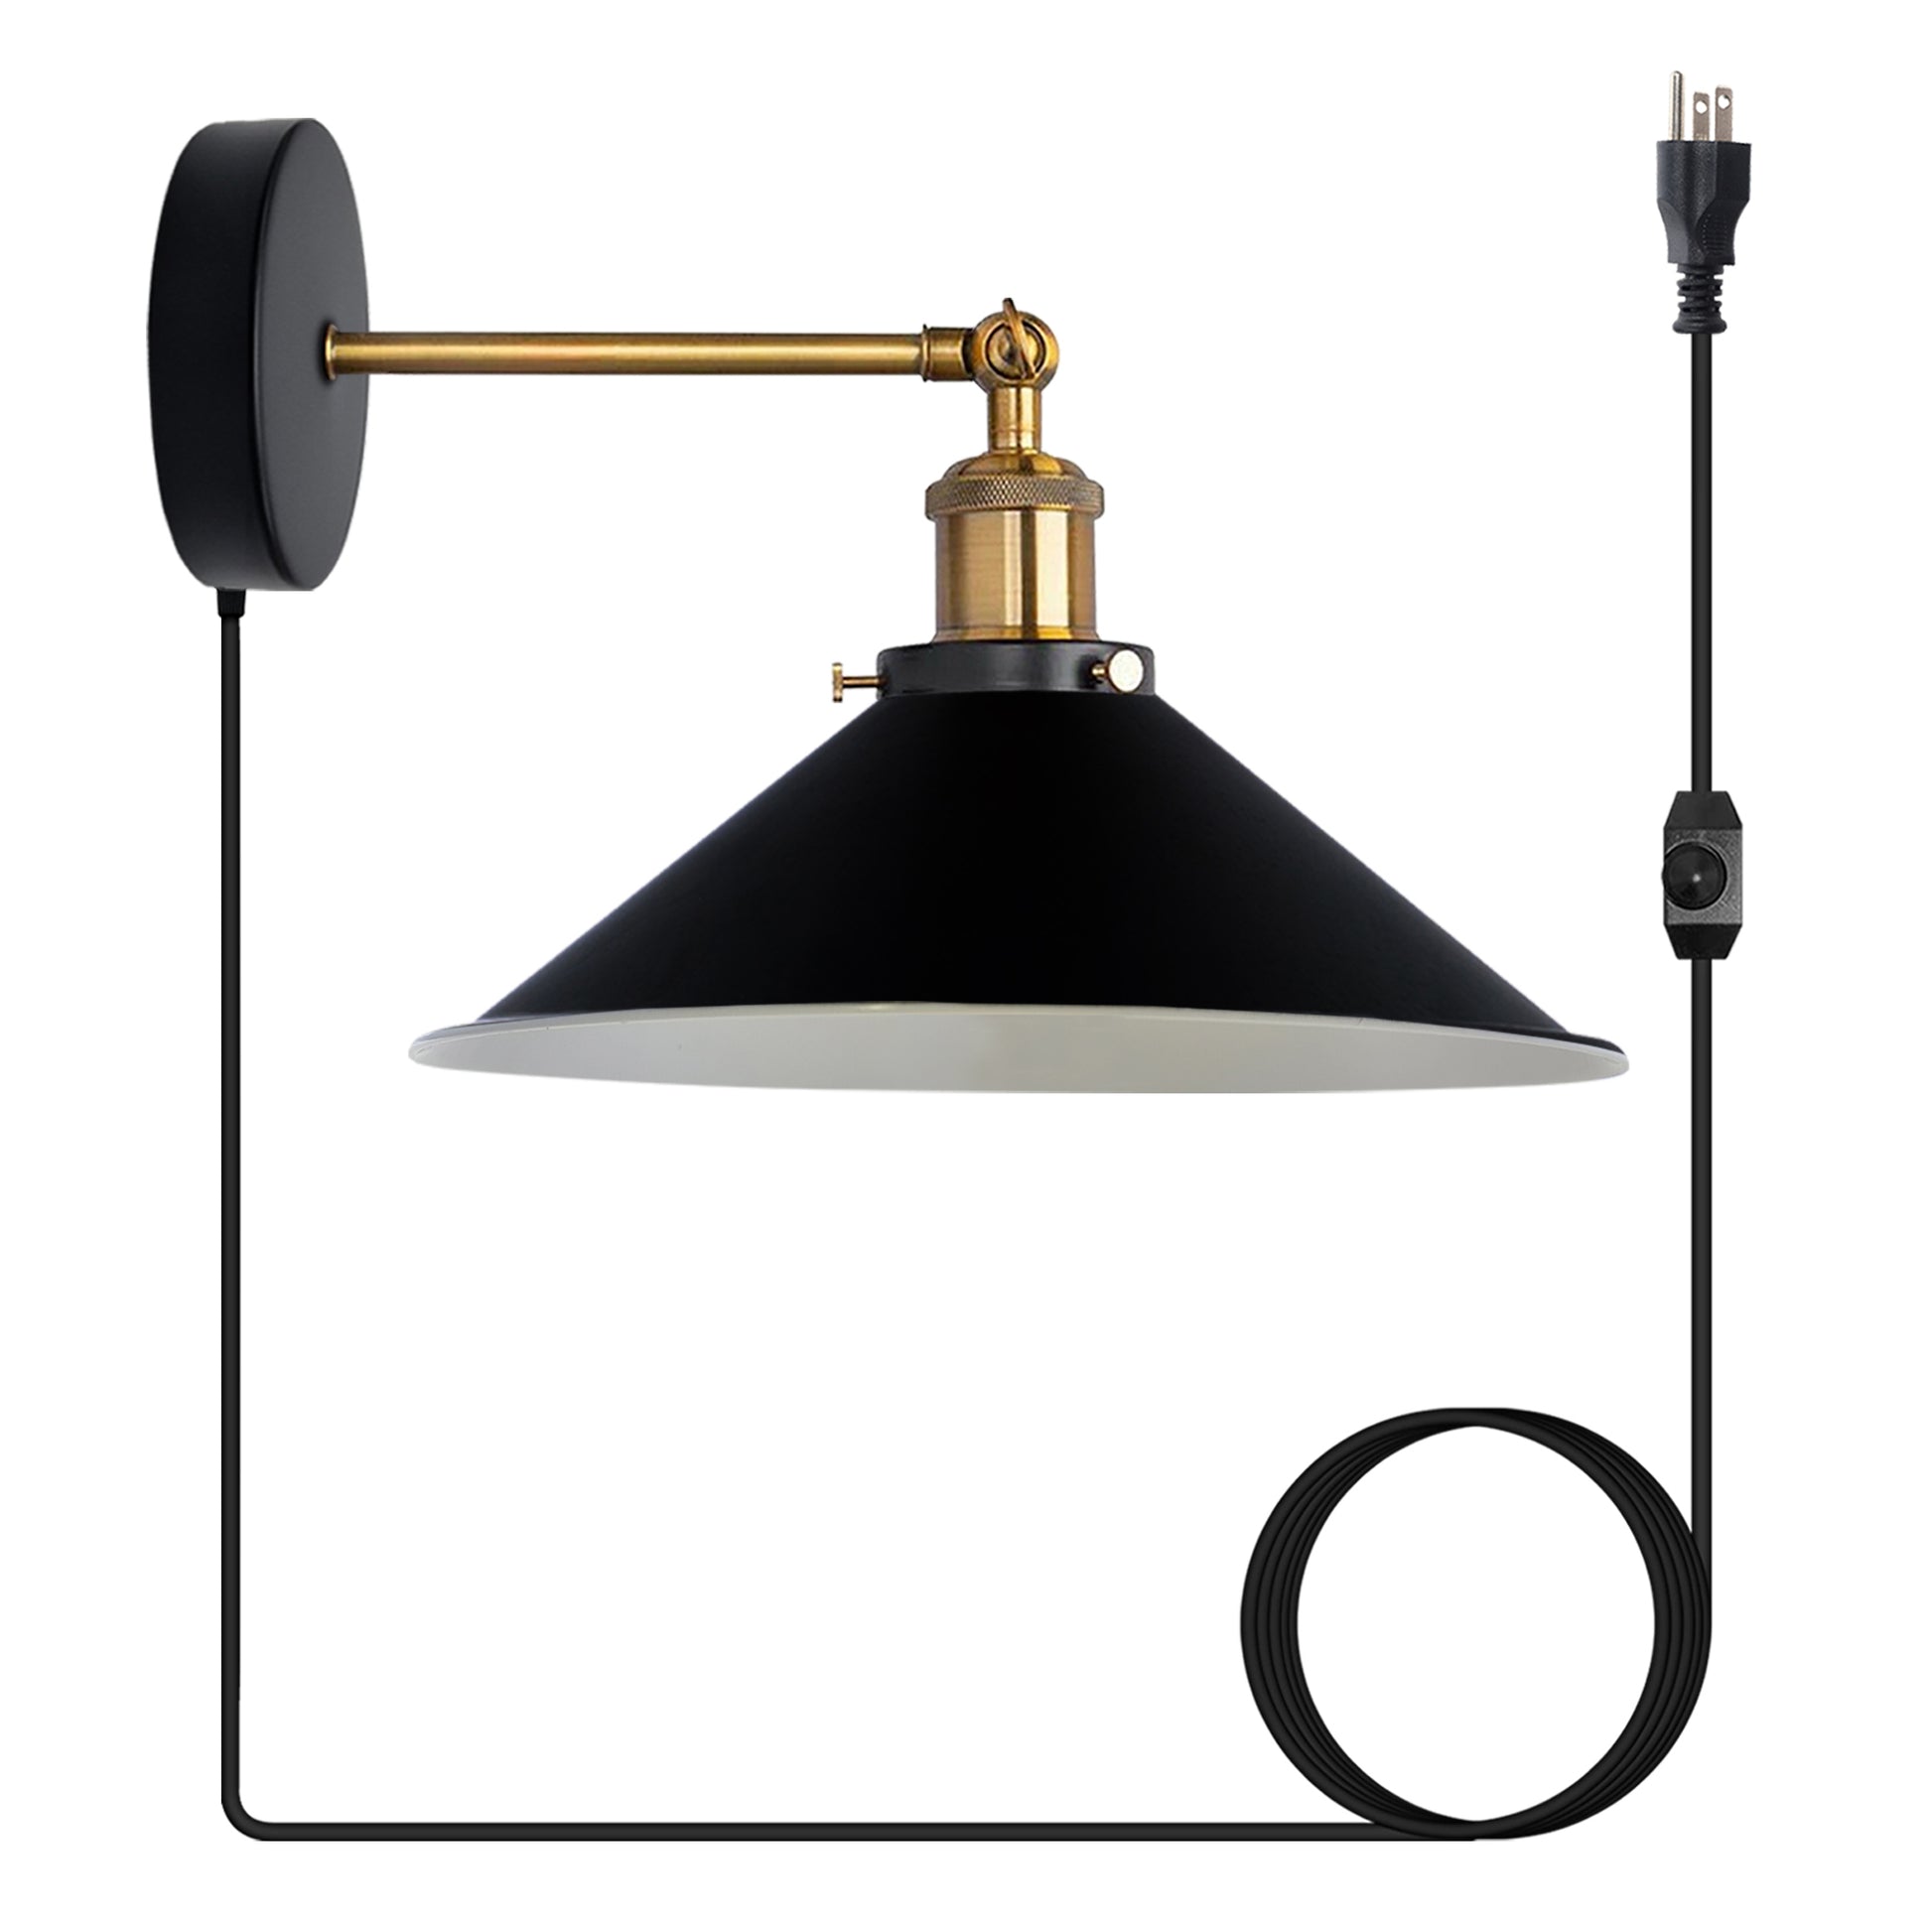 black  plug in wall light with dimmer switch.JPG